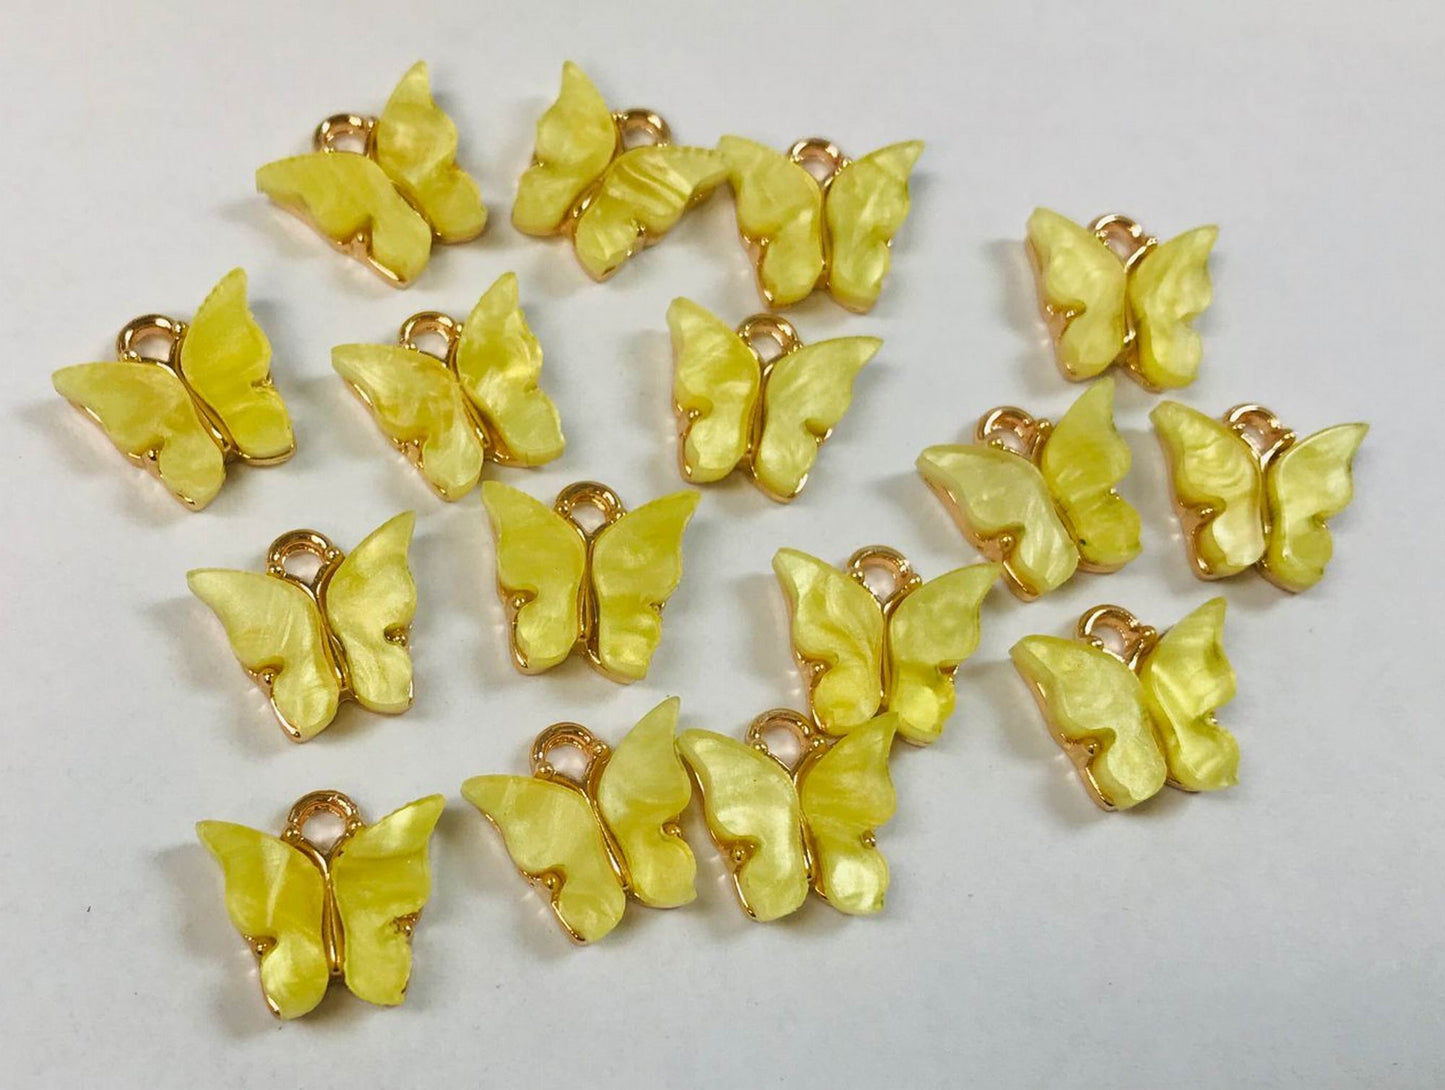 4 Wholesale Acrylic Mariposa Charms, Butterfly Charms, Pearl Butterfly